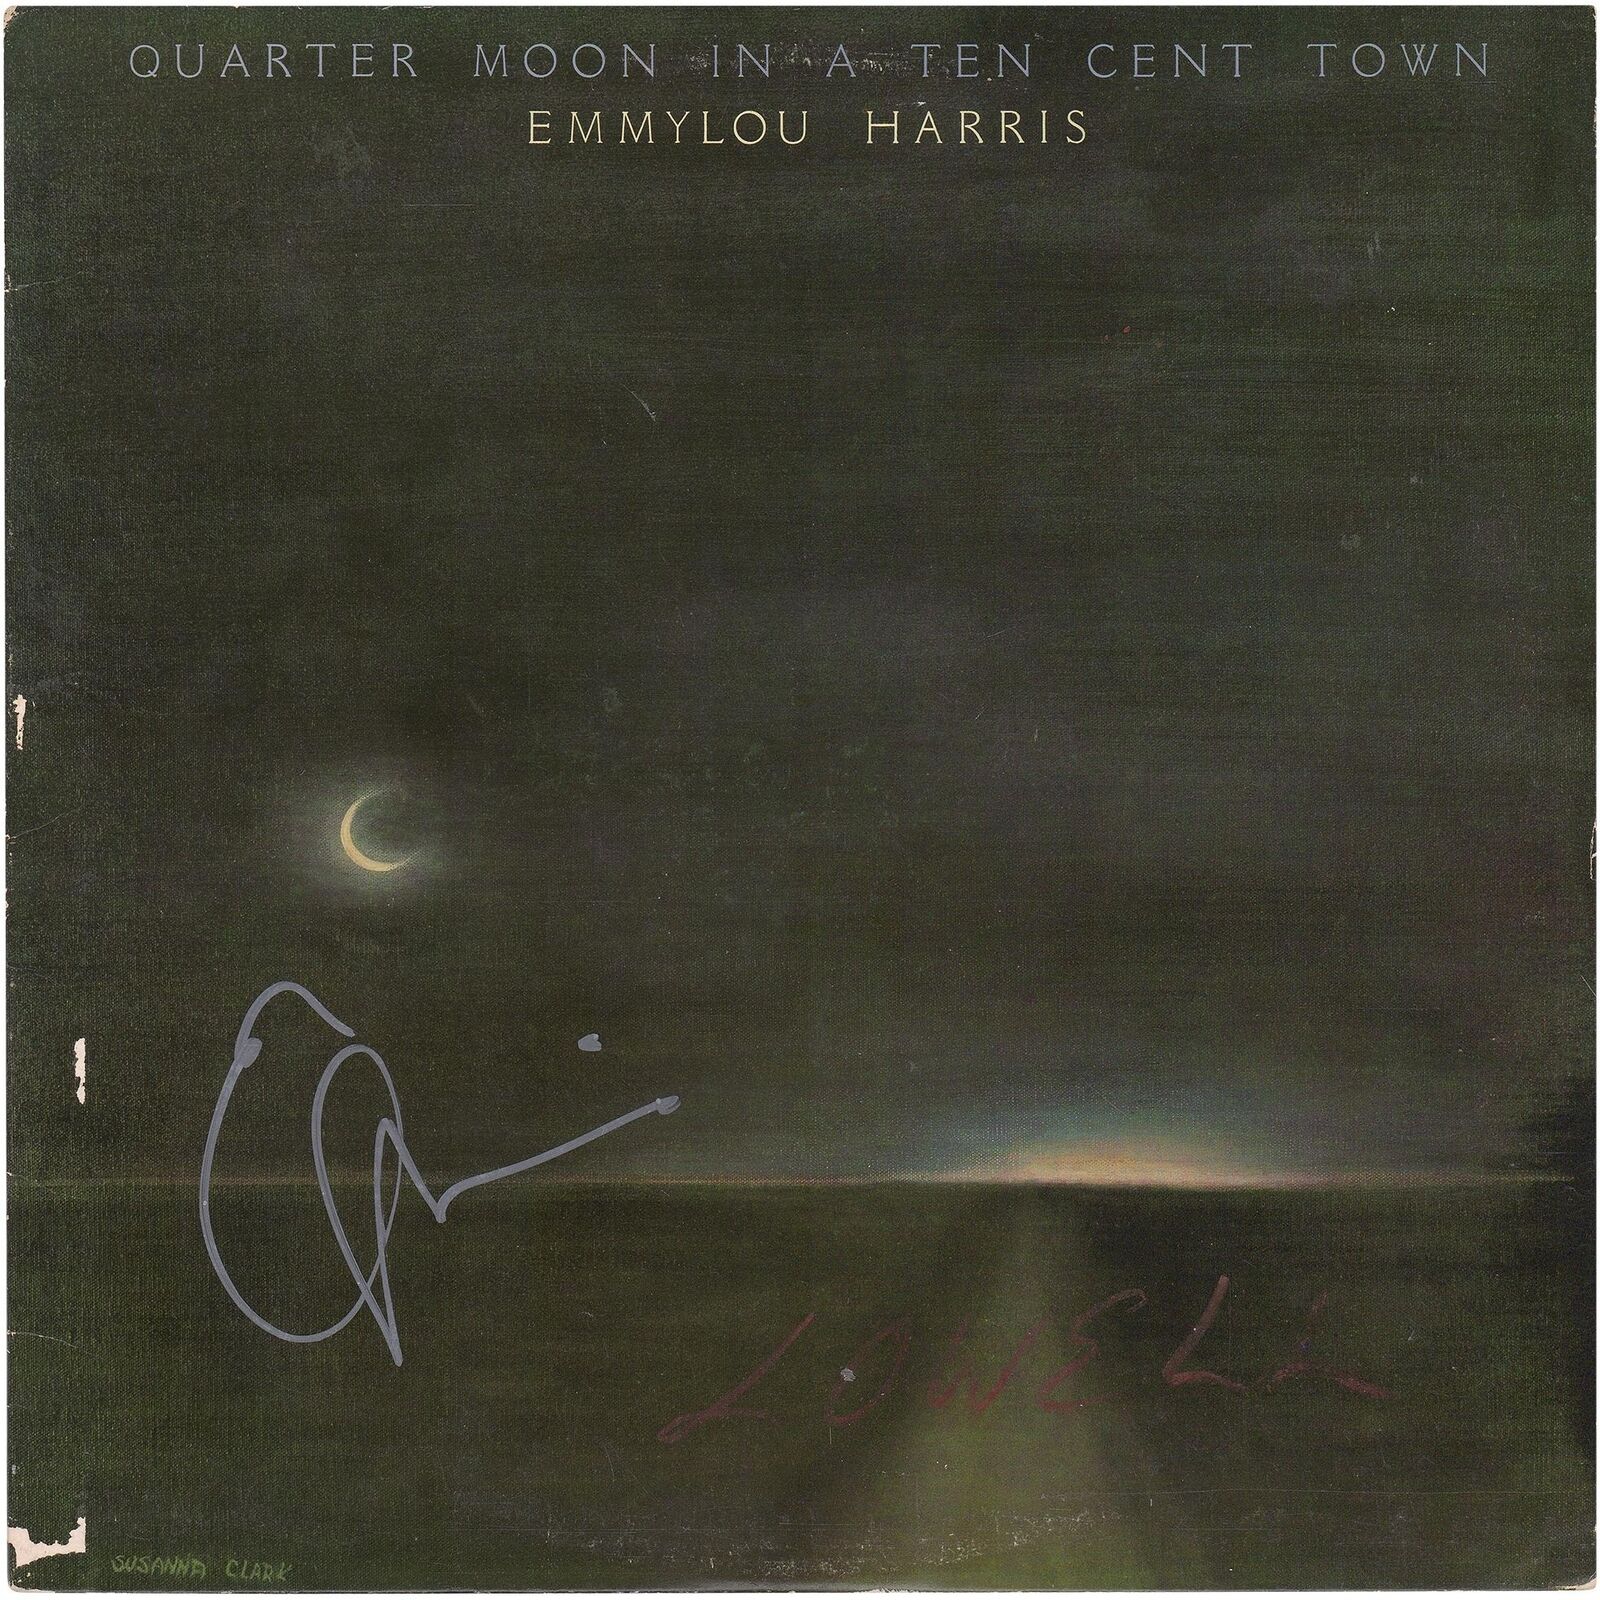 Emmylou Harris Autographed Quarter Moon in a Ten Cent Town